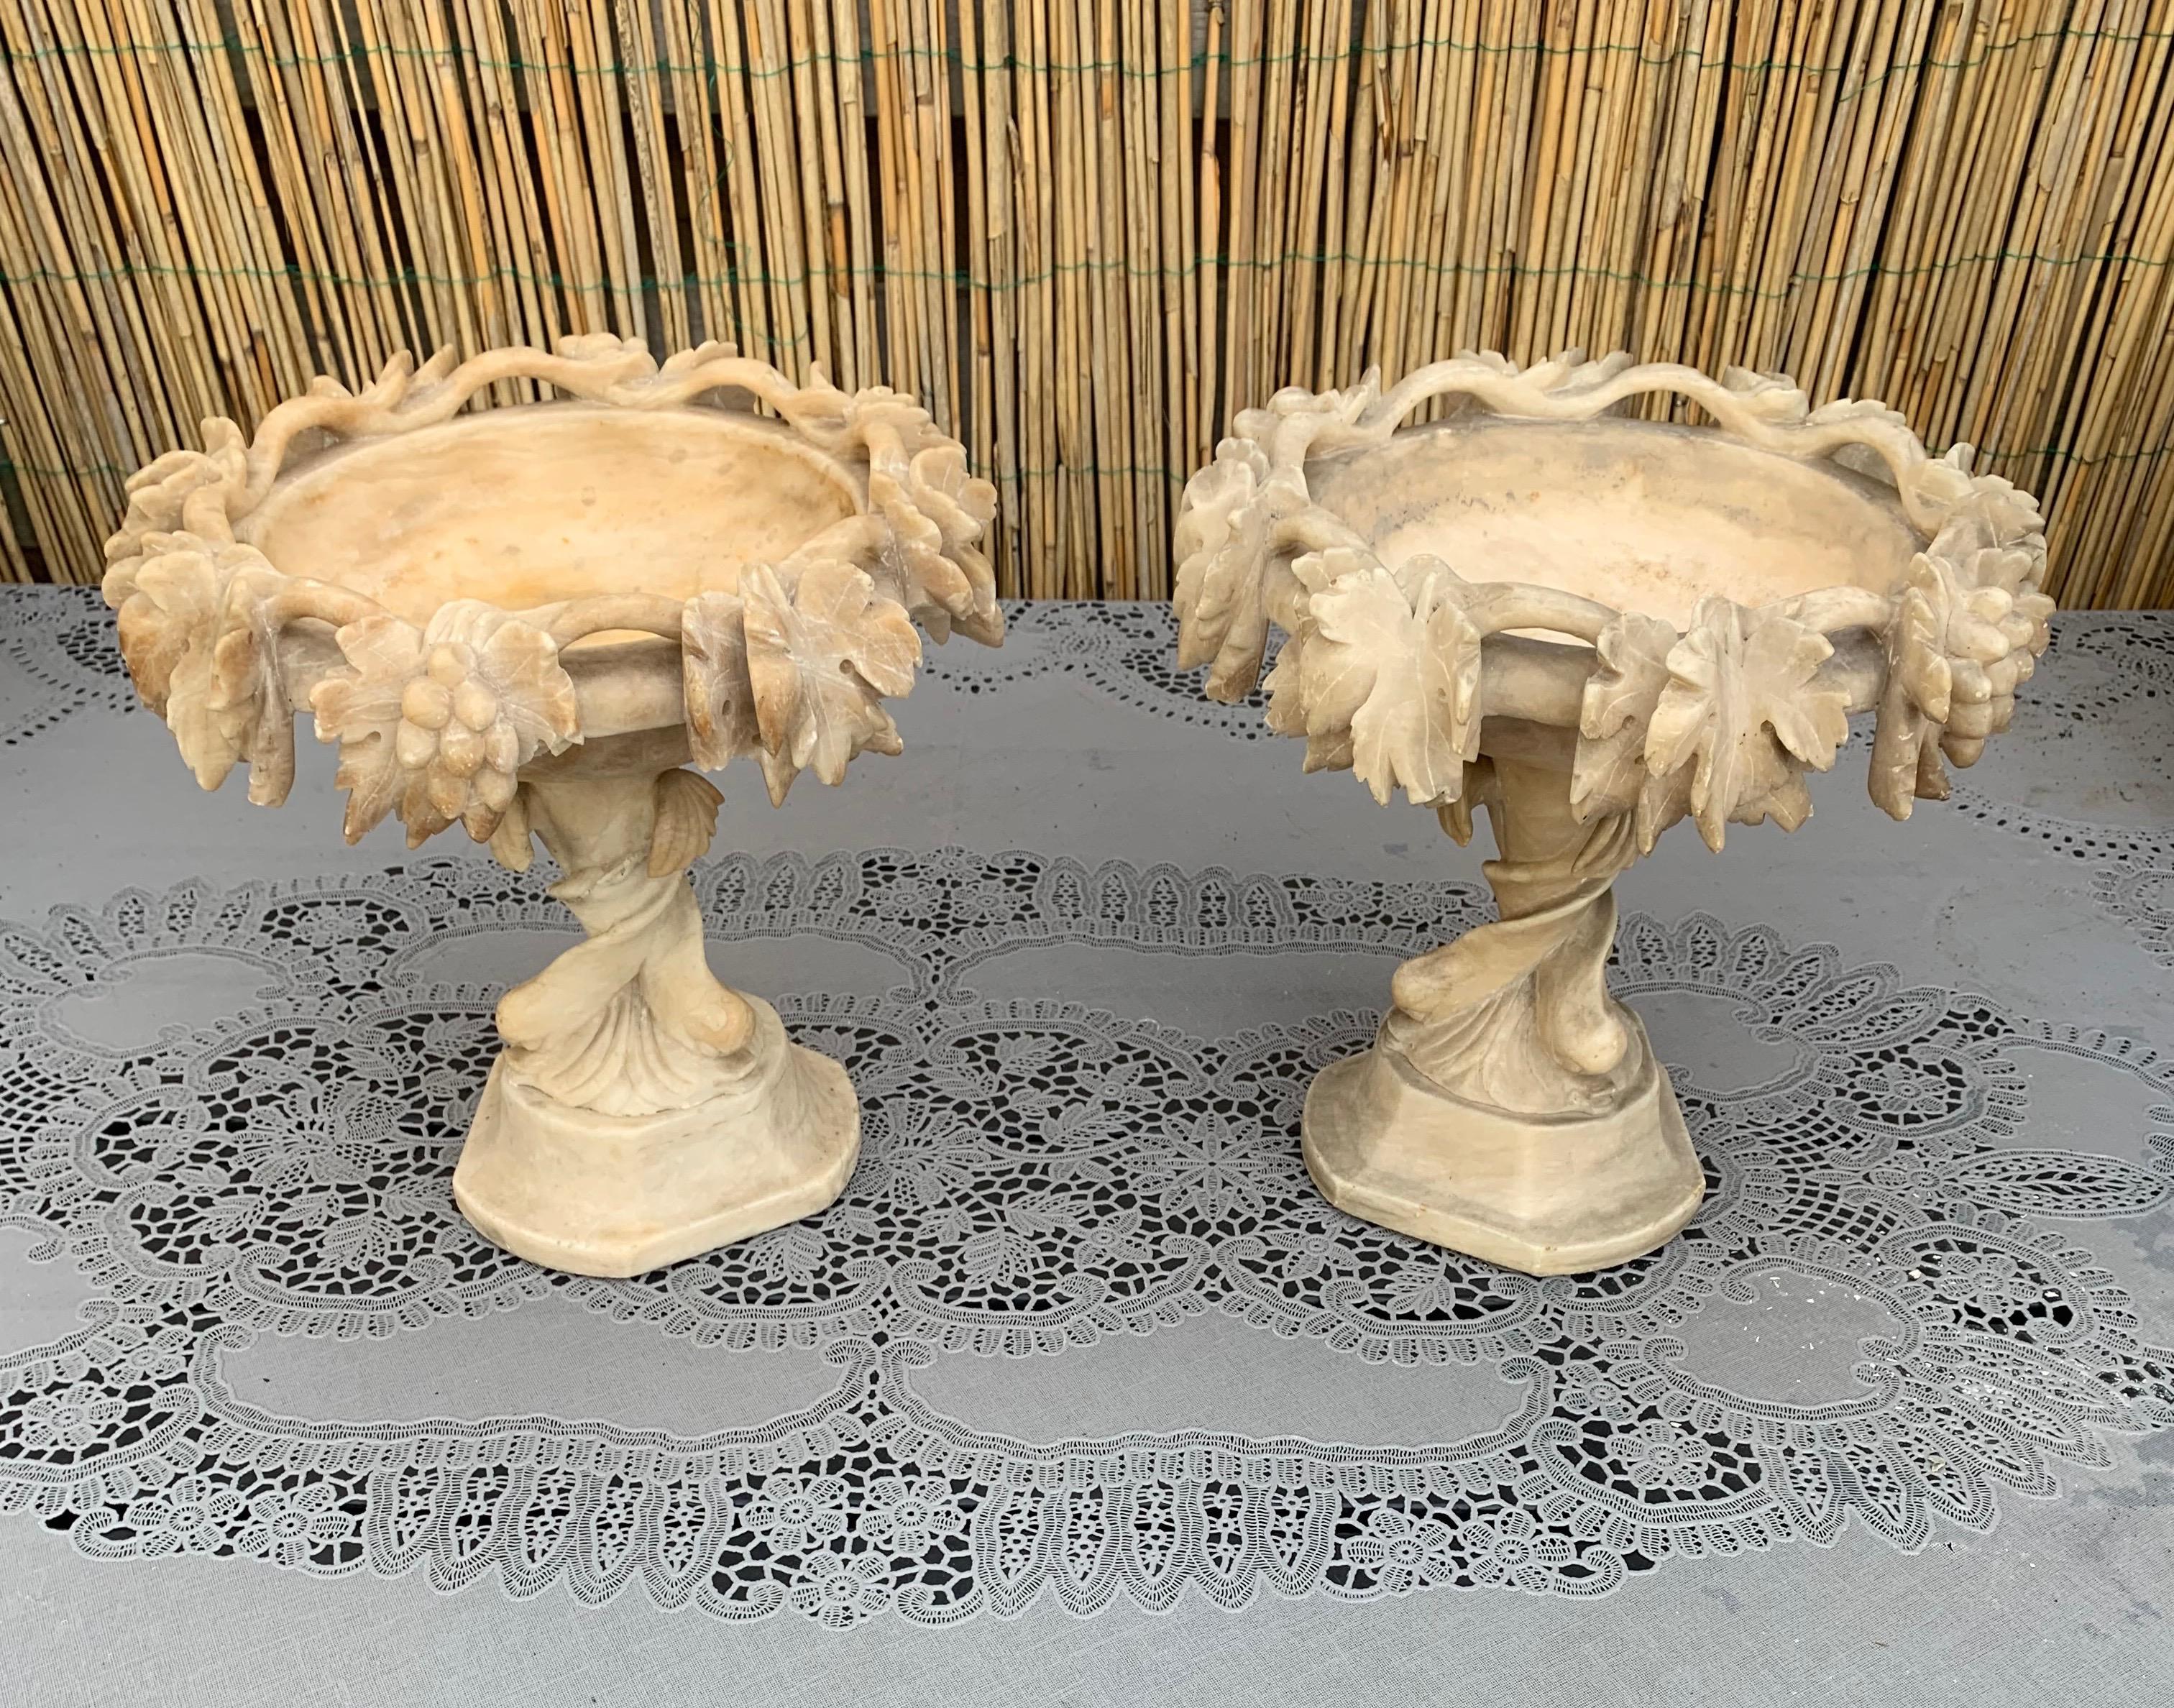 Renaissance Revival Antique & Rare Pair of Hand Carved Italian Alabaster Tazza Table Display Pieces